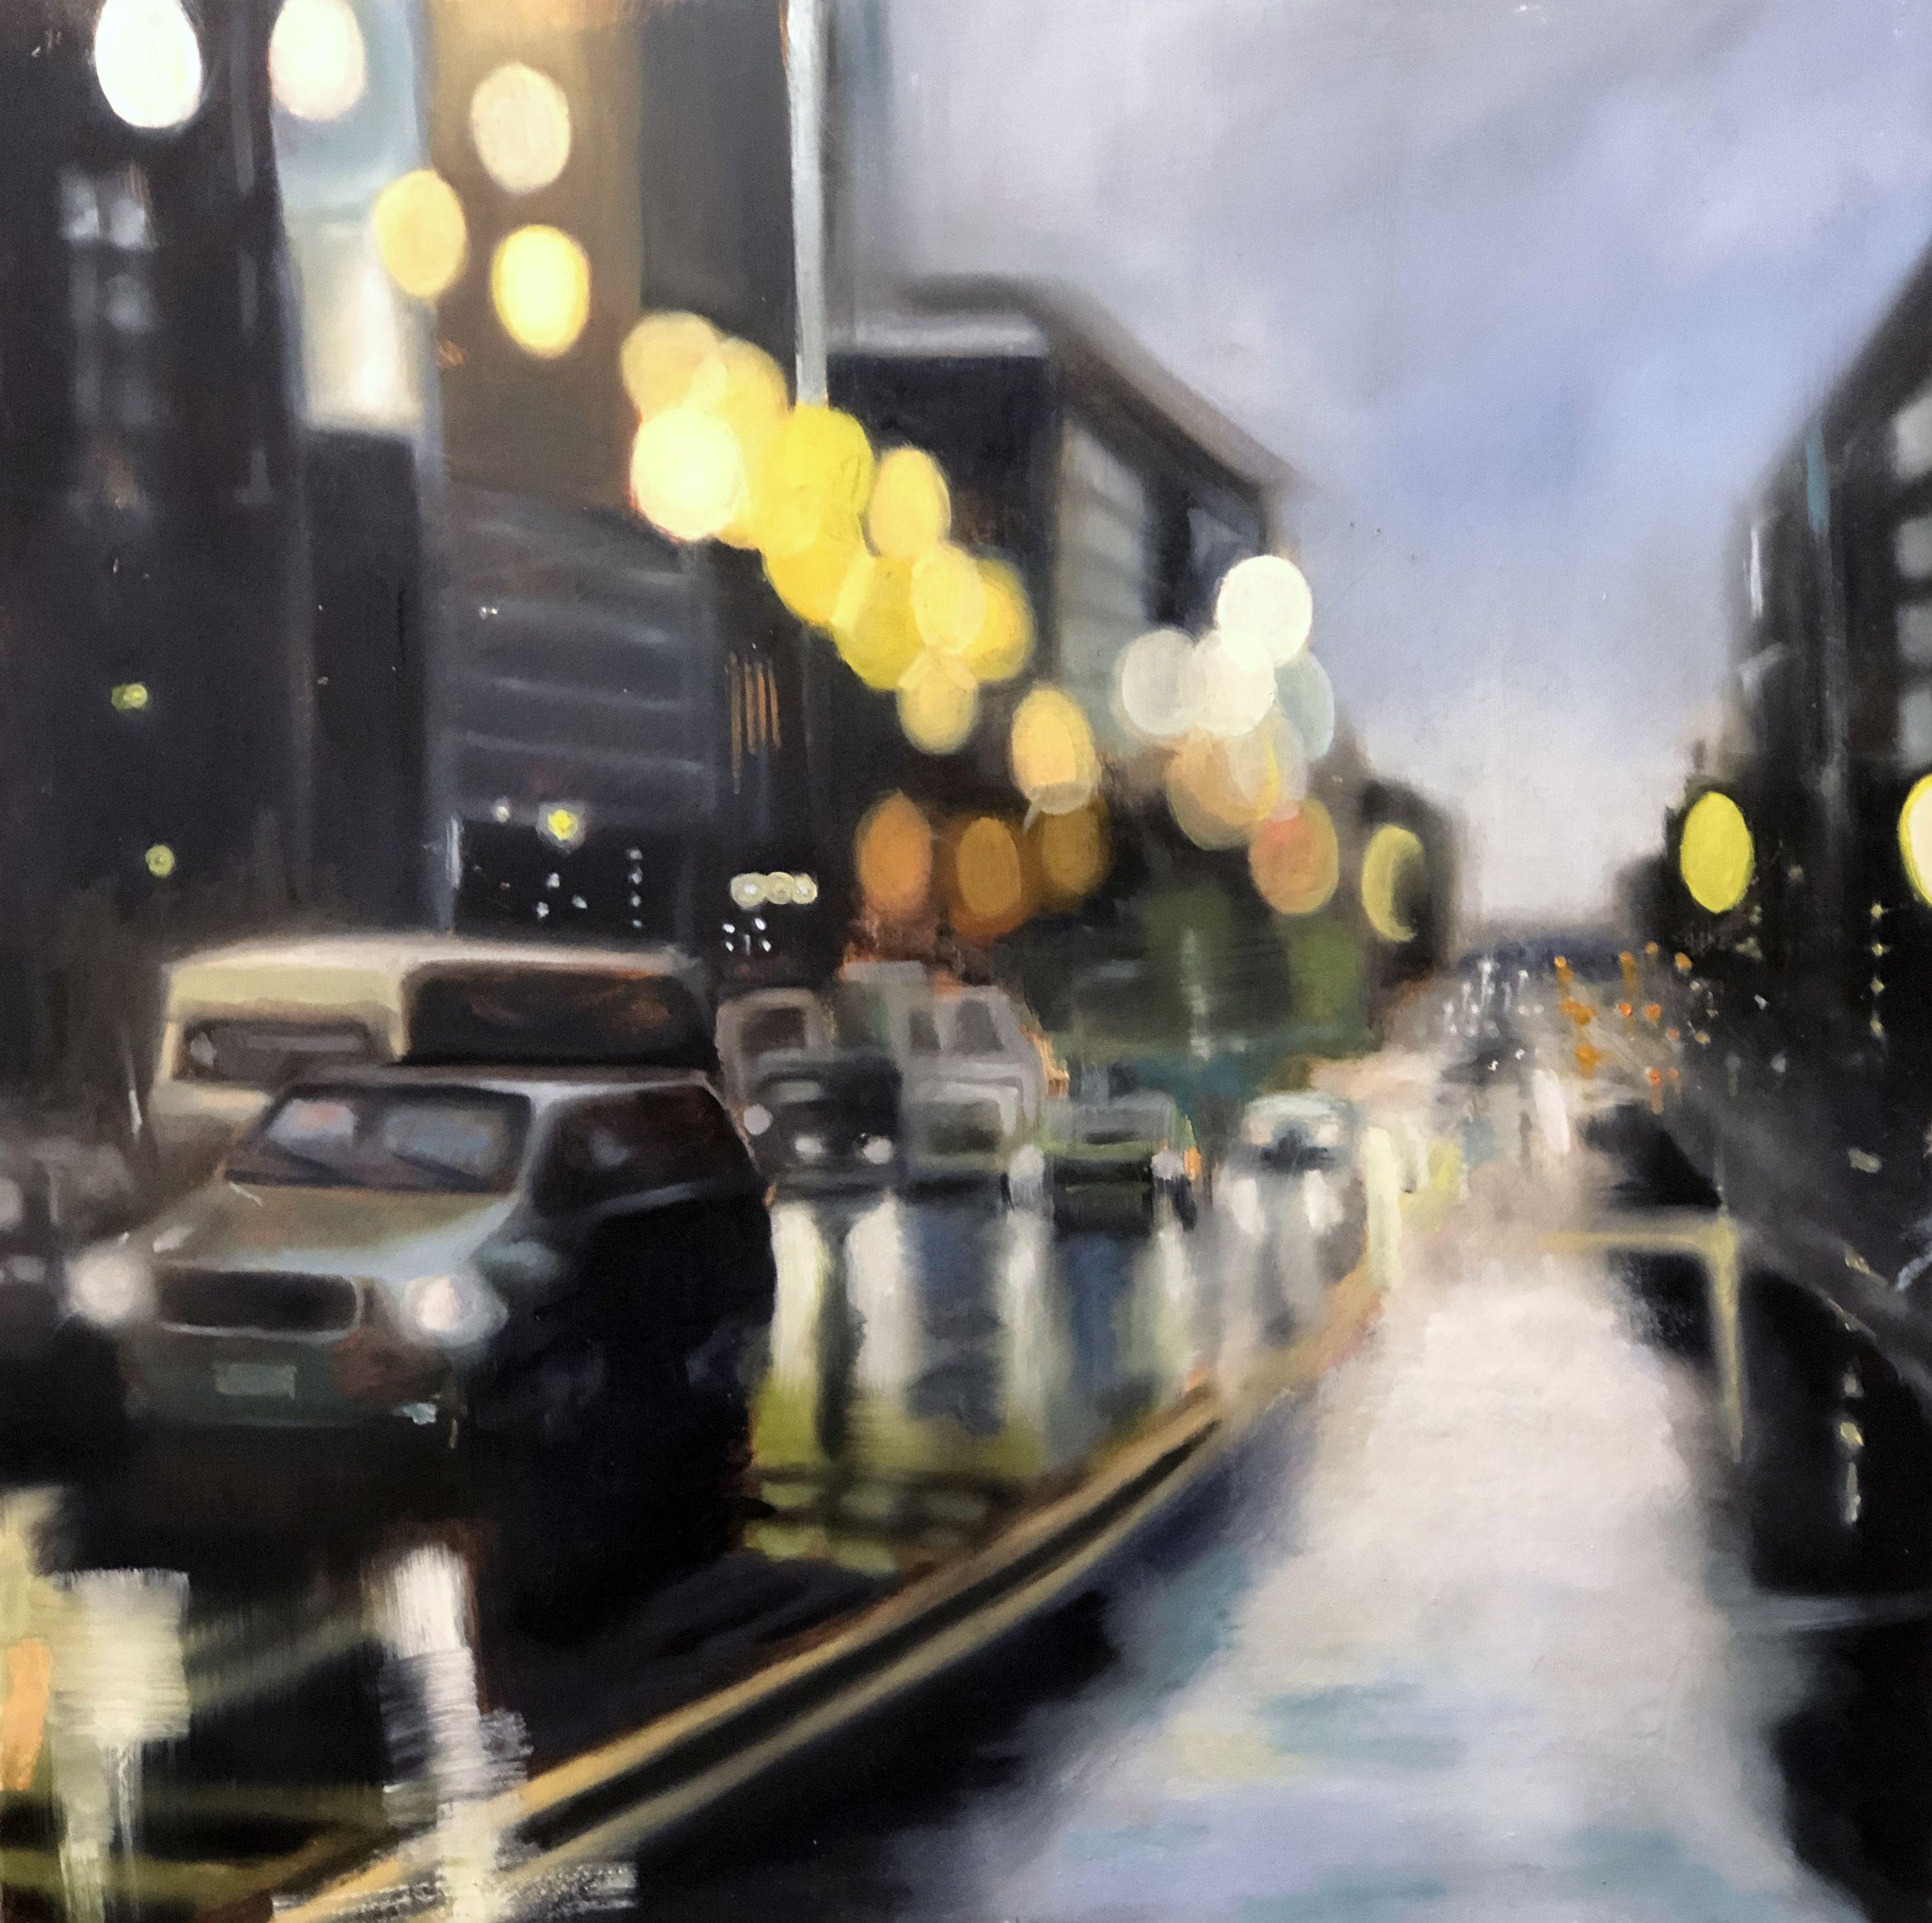 K Street Washington DC - 2019 - Oil on Cradled Board â€“16 H x 16 W x 1.5 Inches and ready to hang    Cradled with a solid wood frame, the panel won't flex, stretch, or warp. The edges are sanded edges to allow for a finished look that is ready to